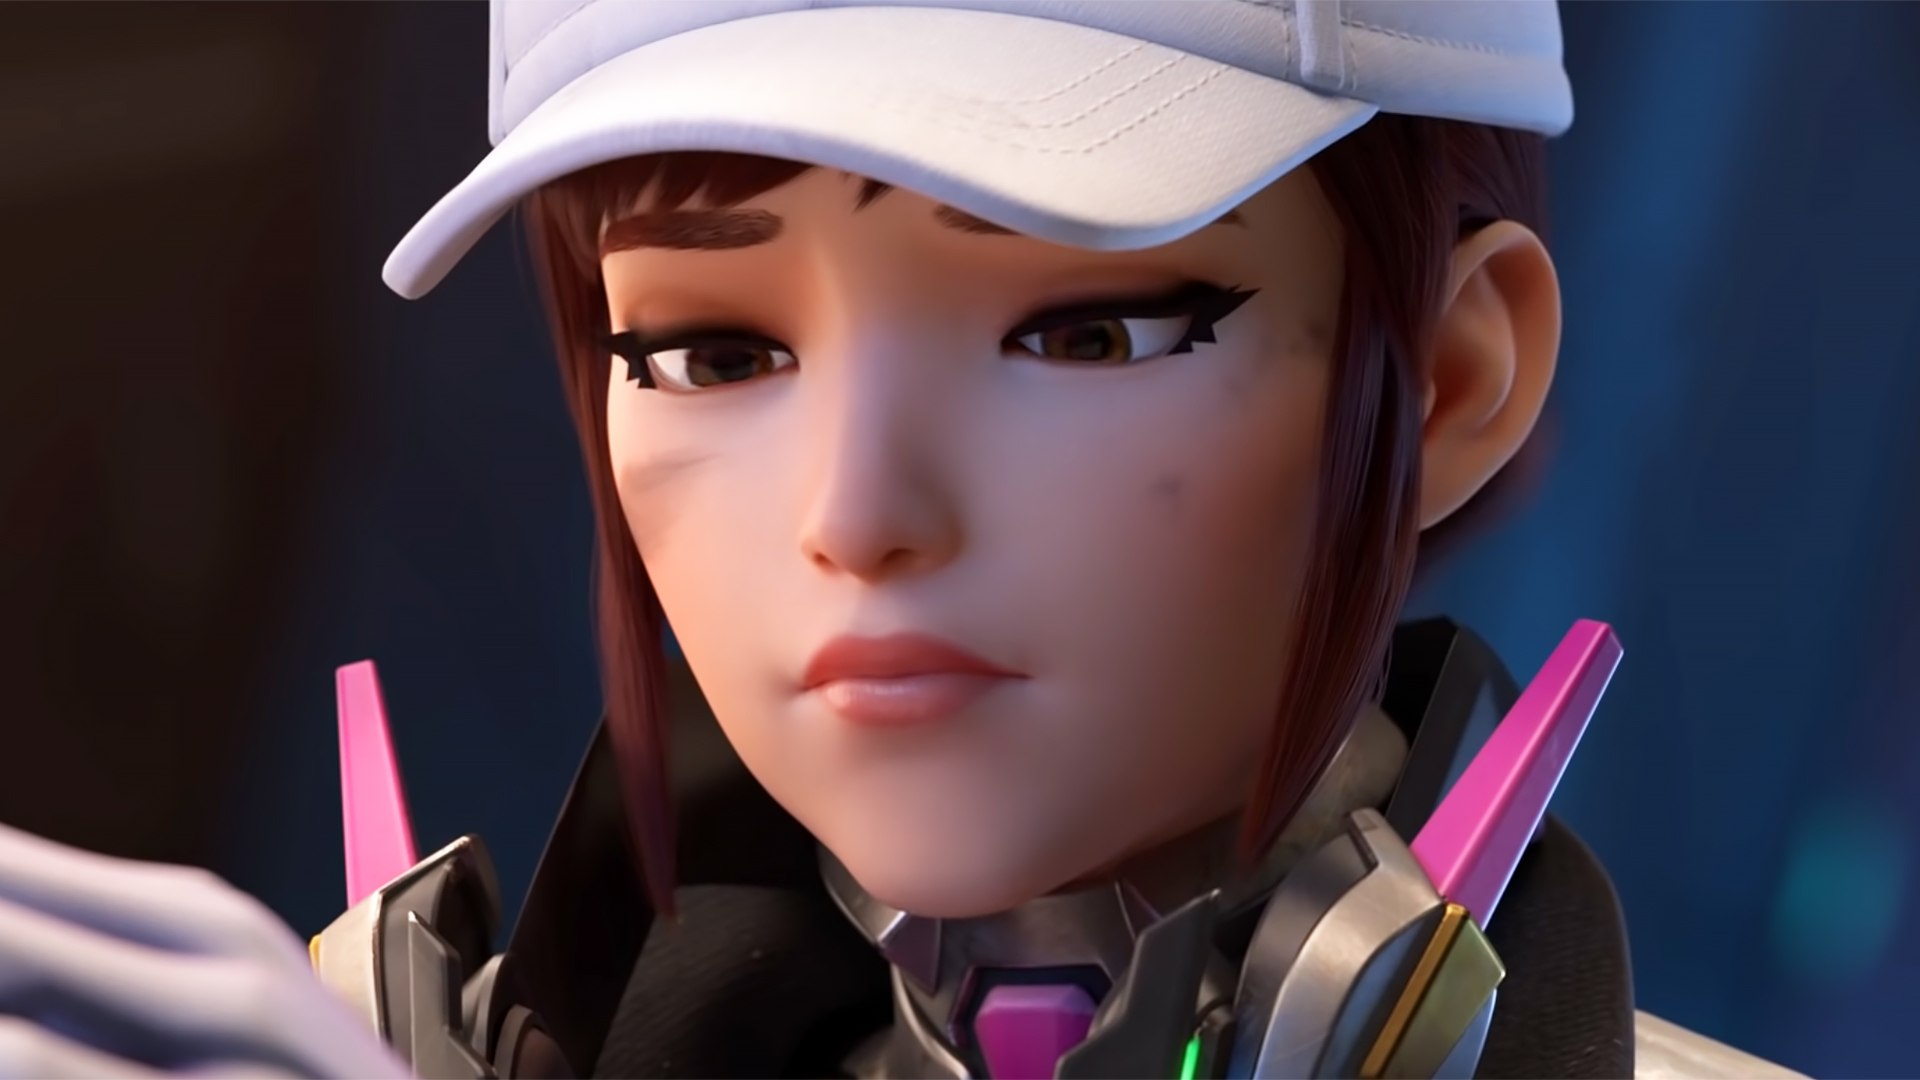  Overwatch 2's Steam release means players can finally review it, and it's not going so well 